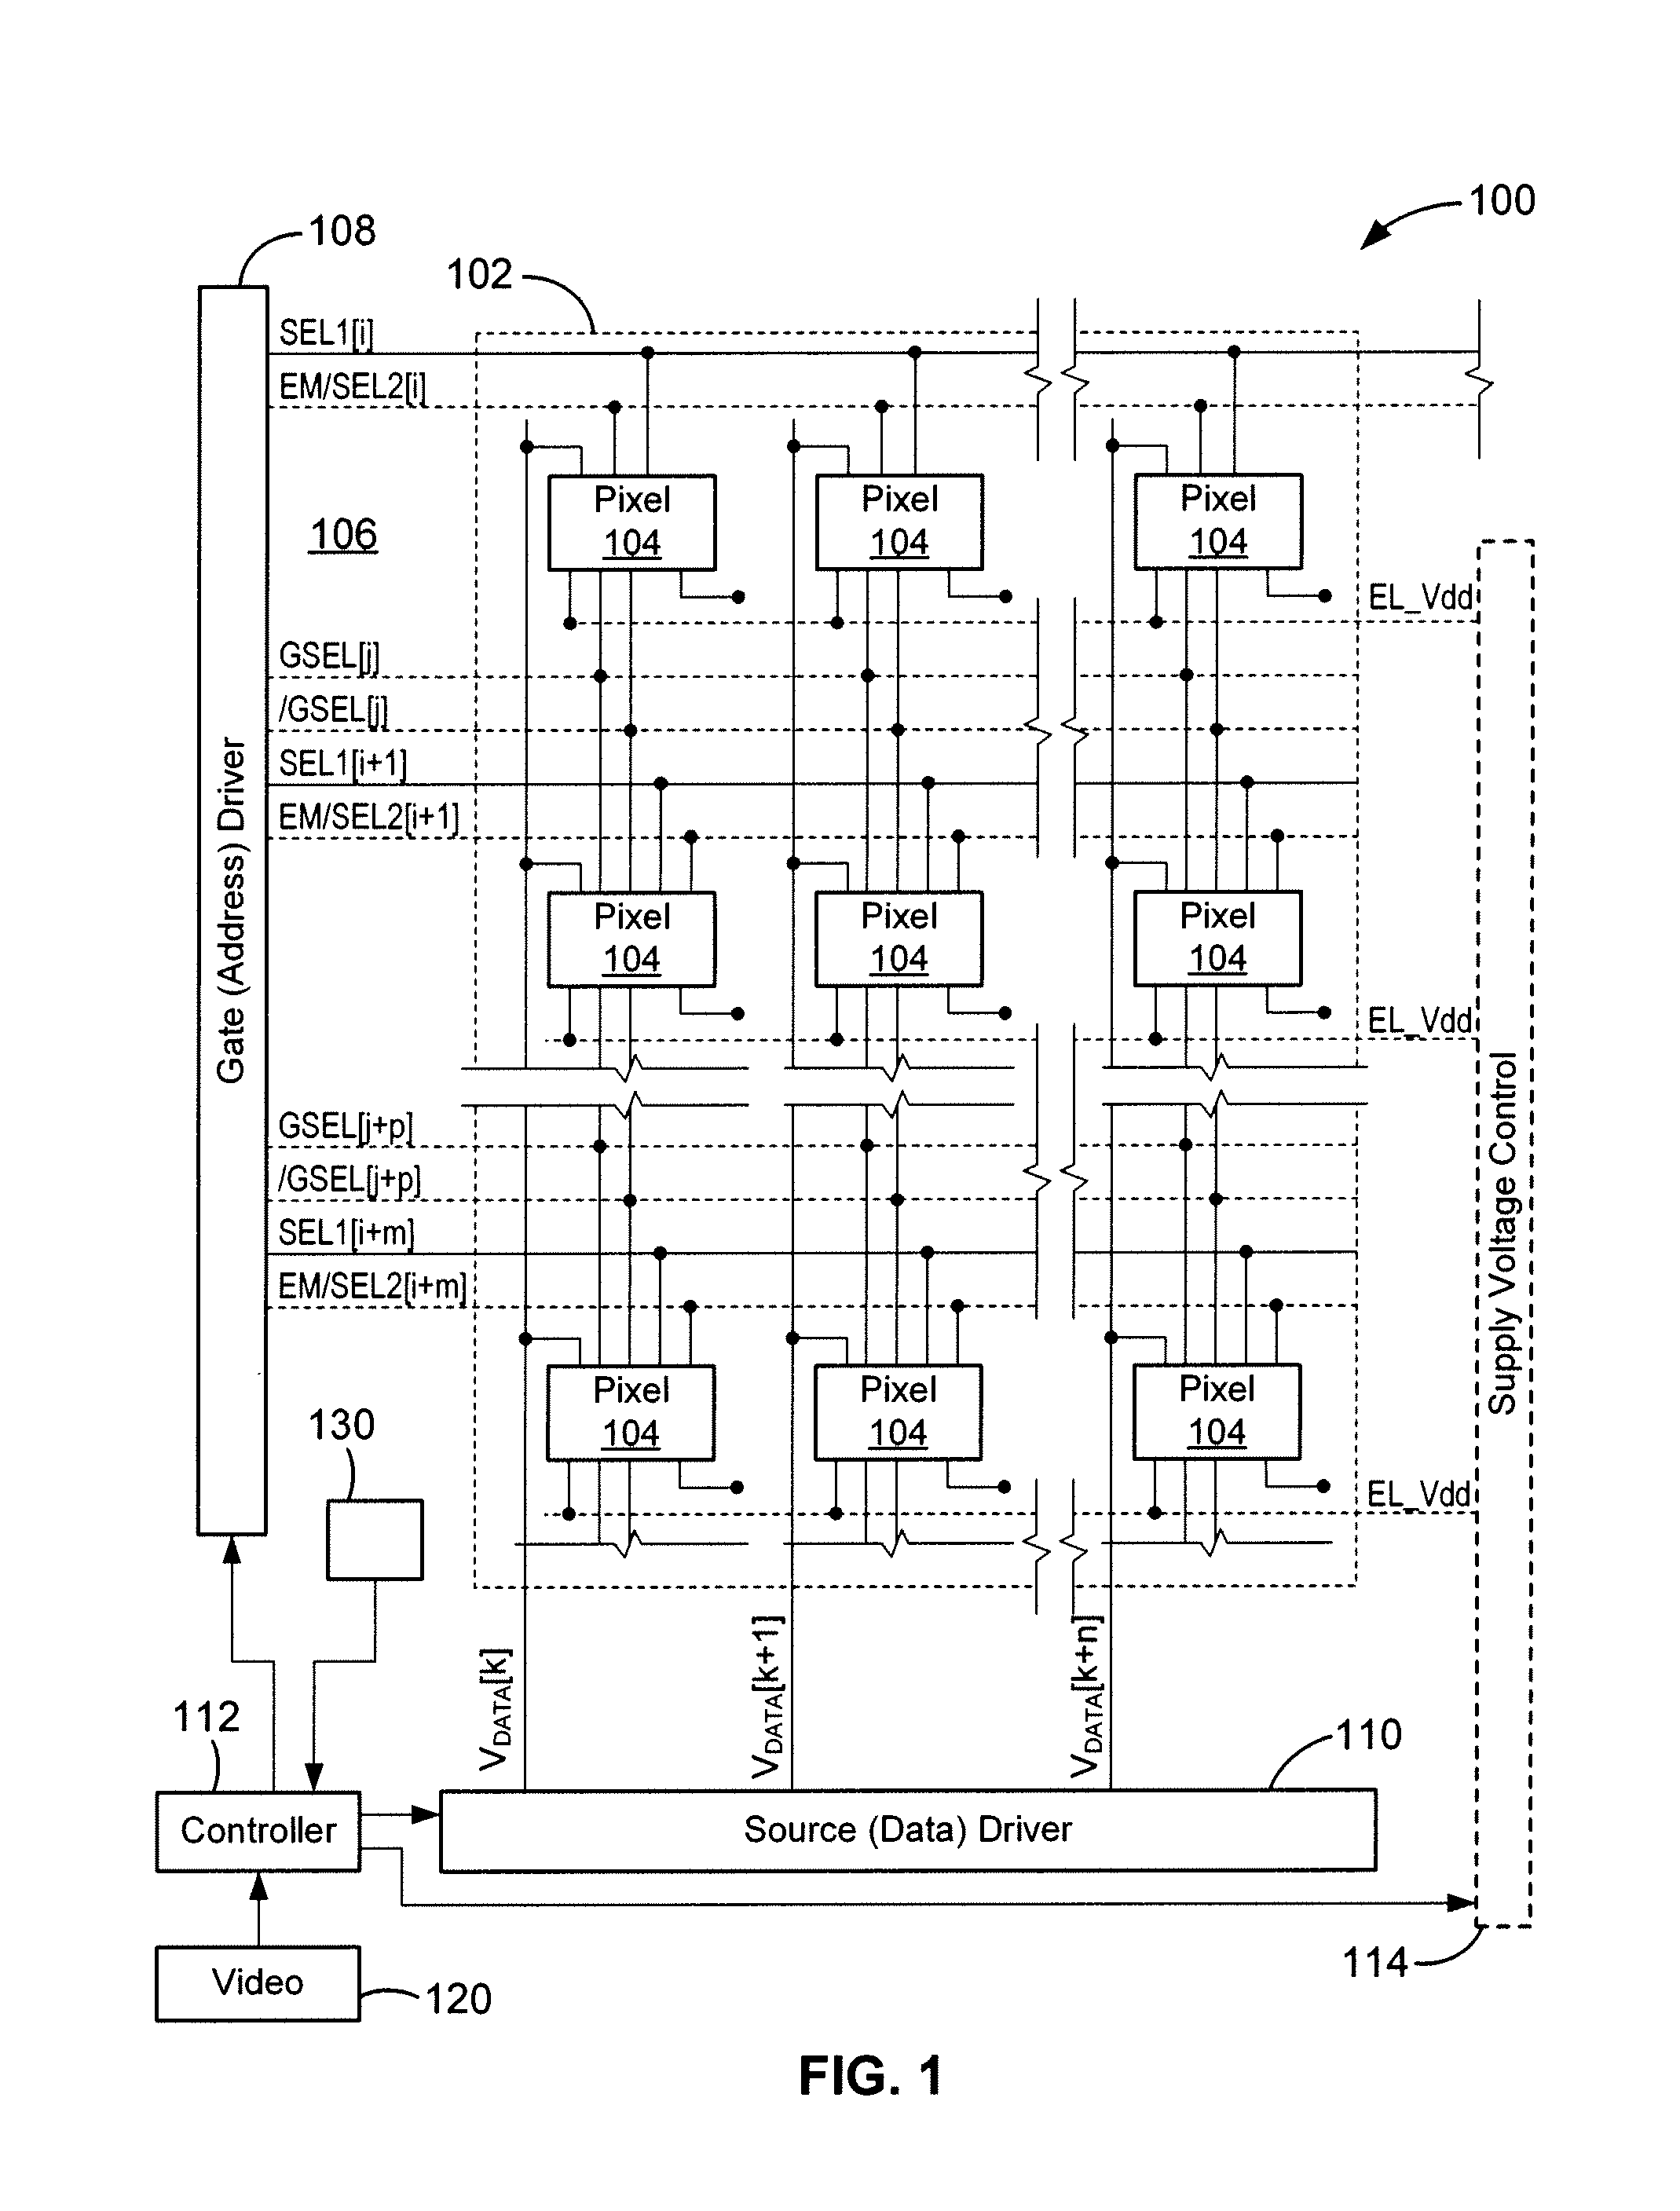 Driving system for active-matrix displays